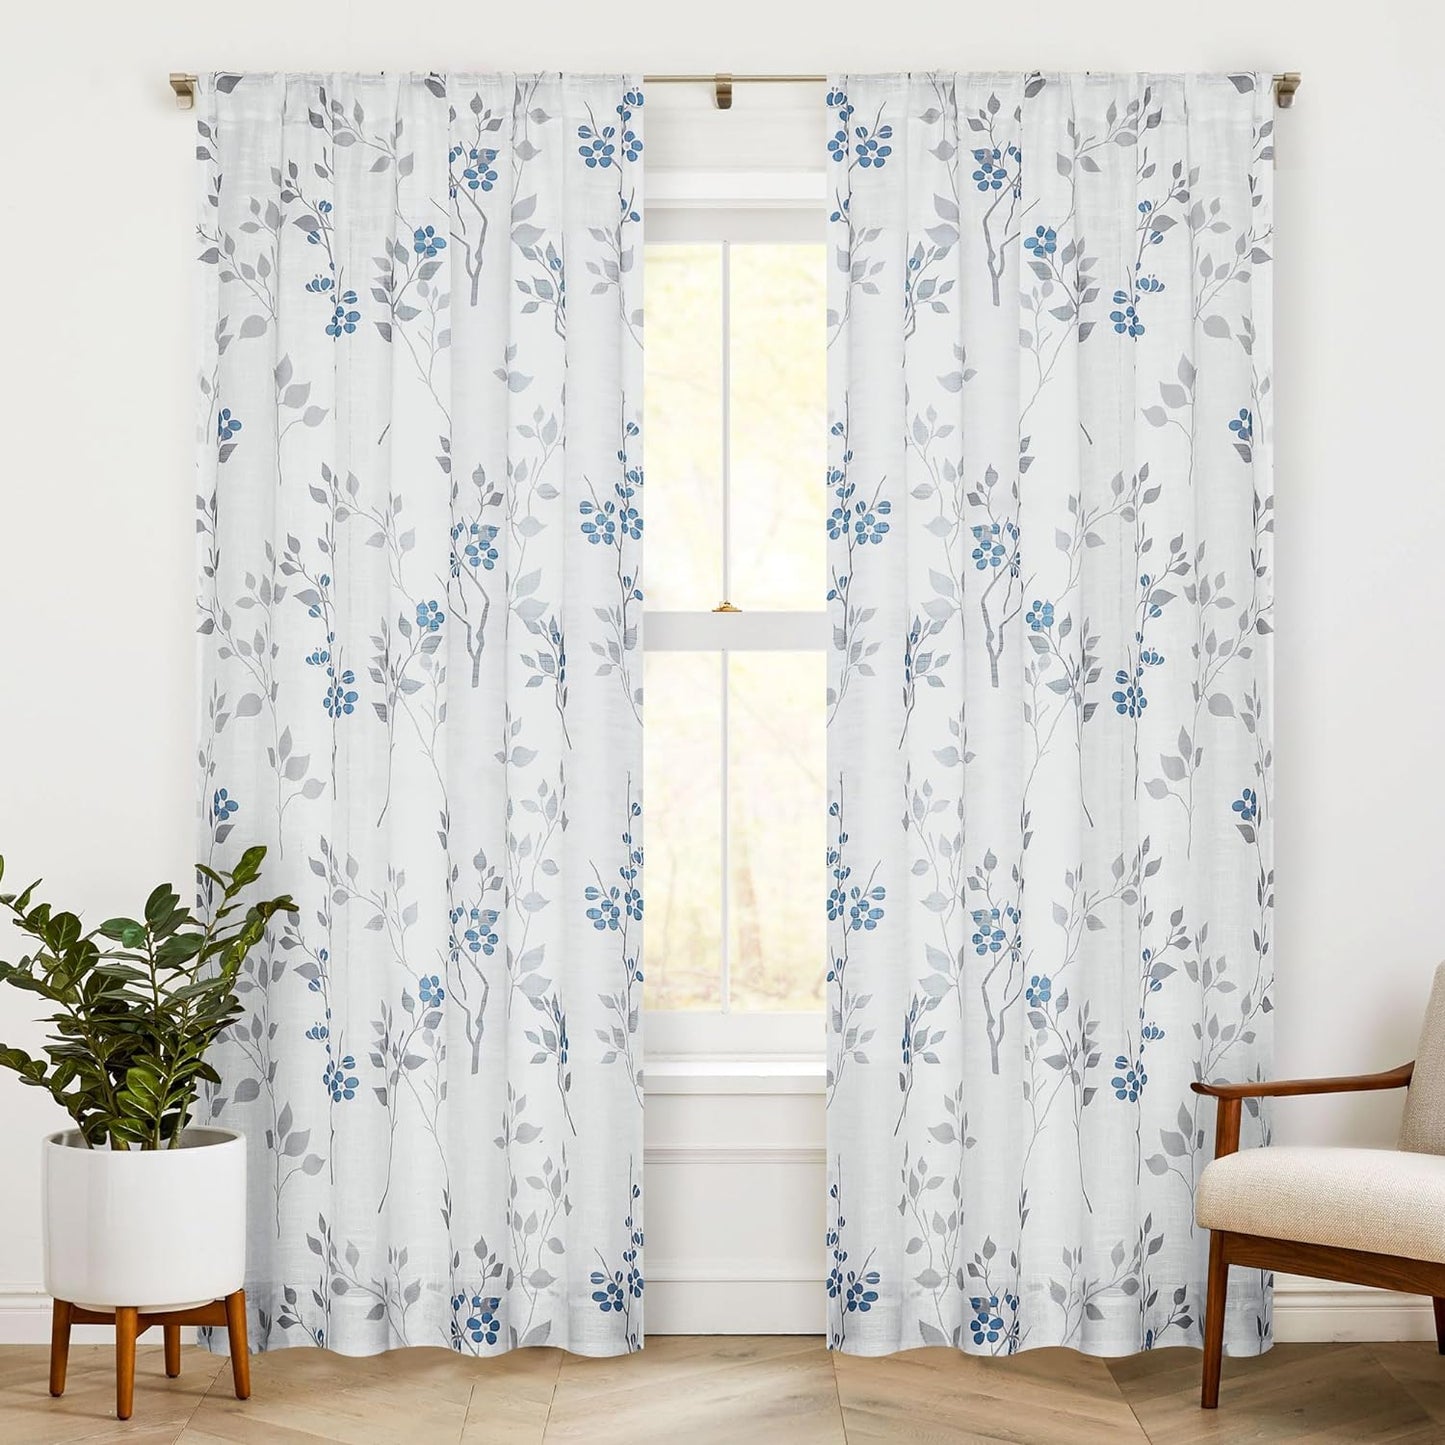 Beauoop Floral Semi Sheer Curtains 84 Inch Long for Living Room Bedroom Farmhouse Botanical Leaf Printed Rustic Linen Texture Panel Drapes Rod Pocket Window Treatment,2 Panels,50 Wide,Yellow/Gray  Beauoop Blue/Gray 50"X108"X2 